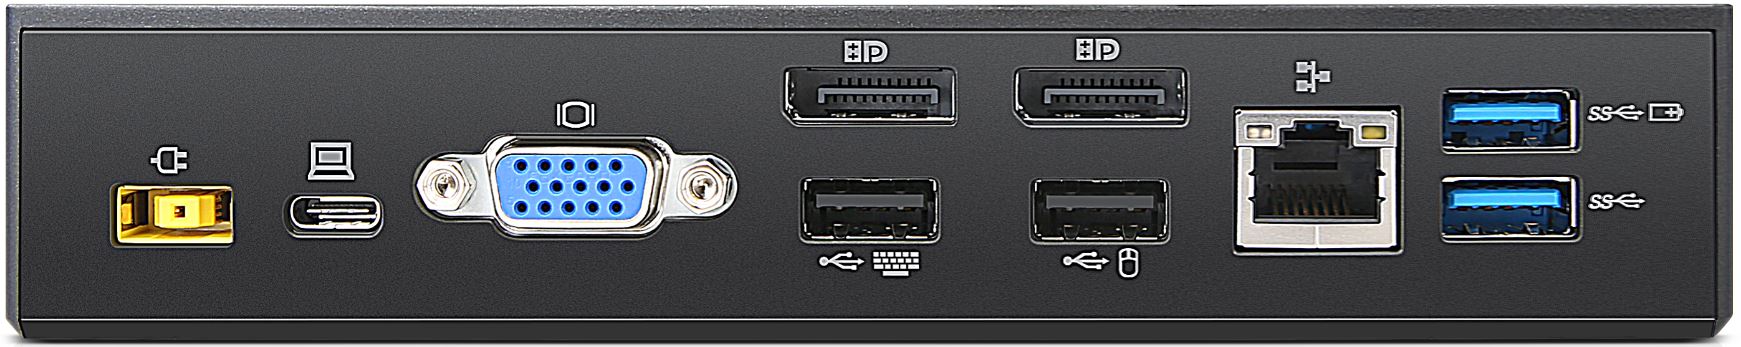 gavnlig bacon Bule ThinkPad USB-C Dock - Overview and Service Parts - Lenovo Support AU